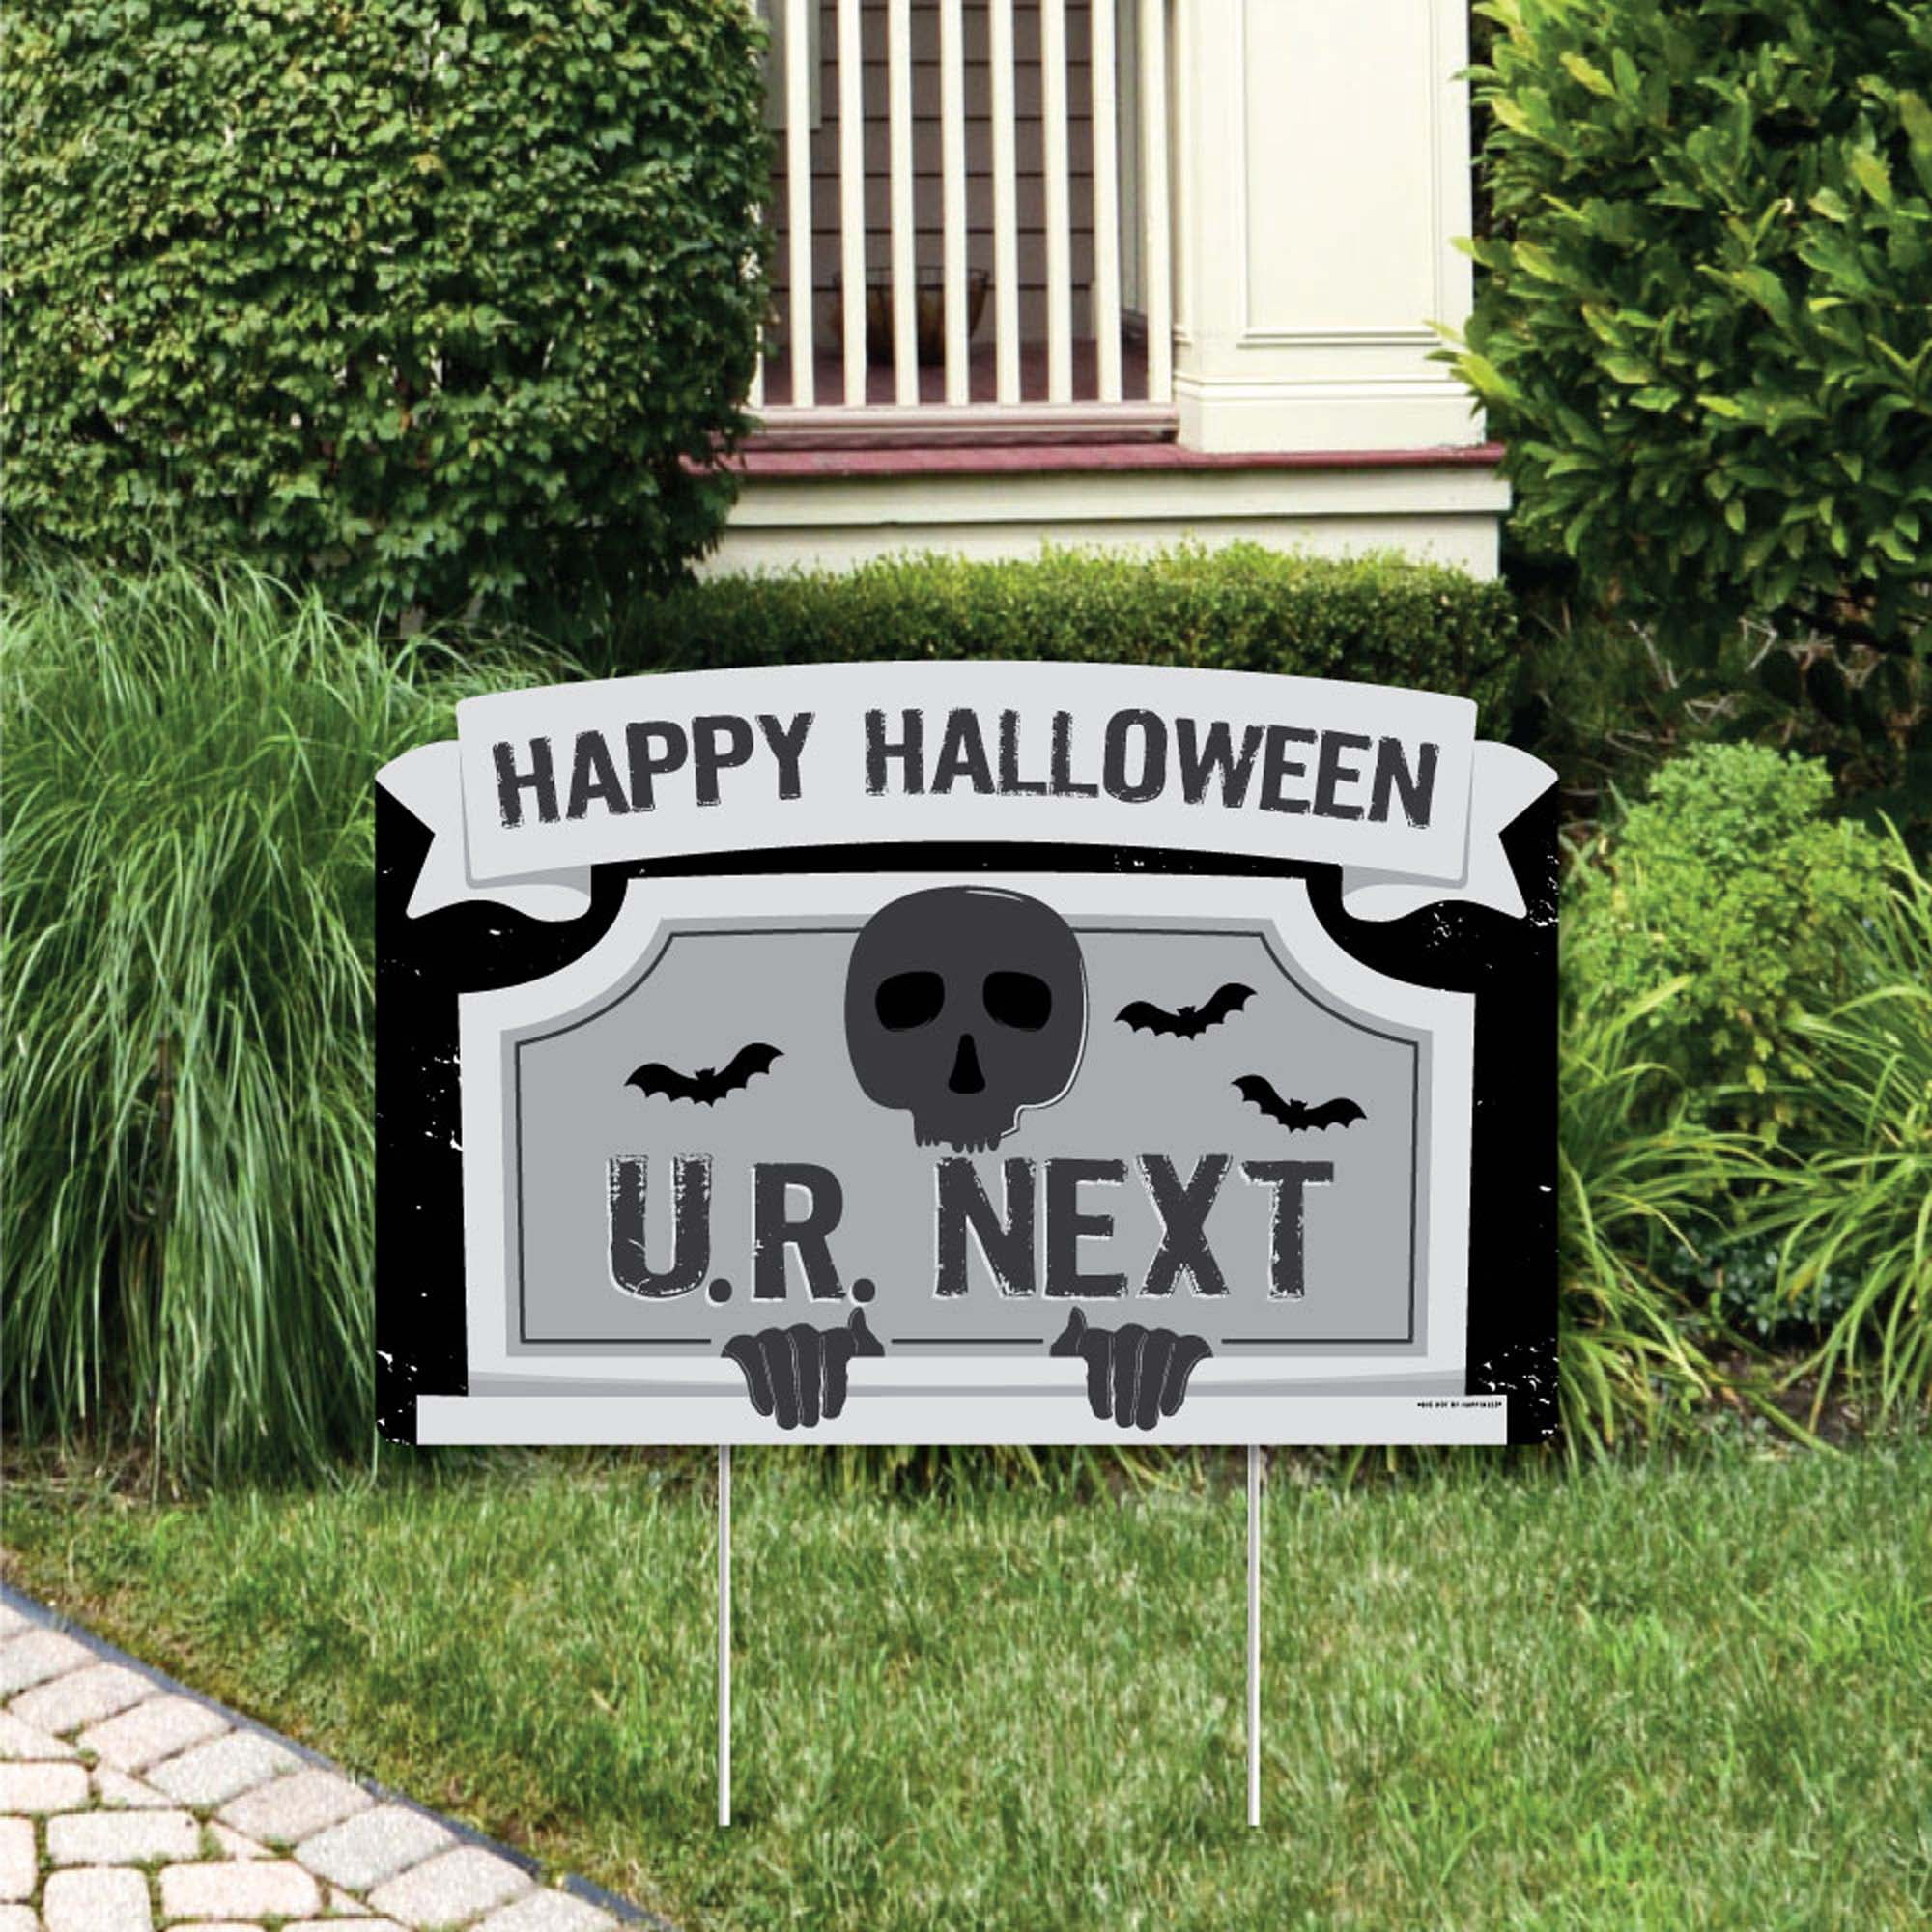 Danger Mines THICK Sign Halloween Decor Prop Road and Lawn Decoration 